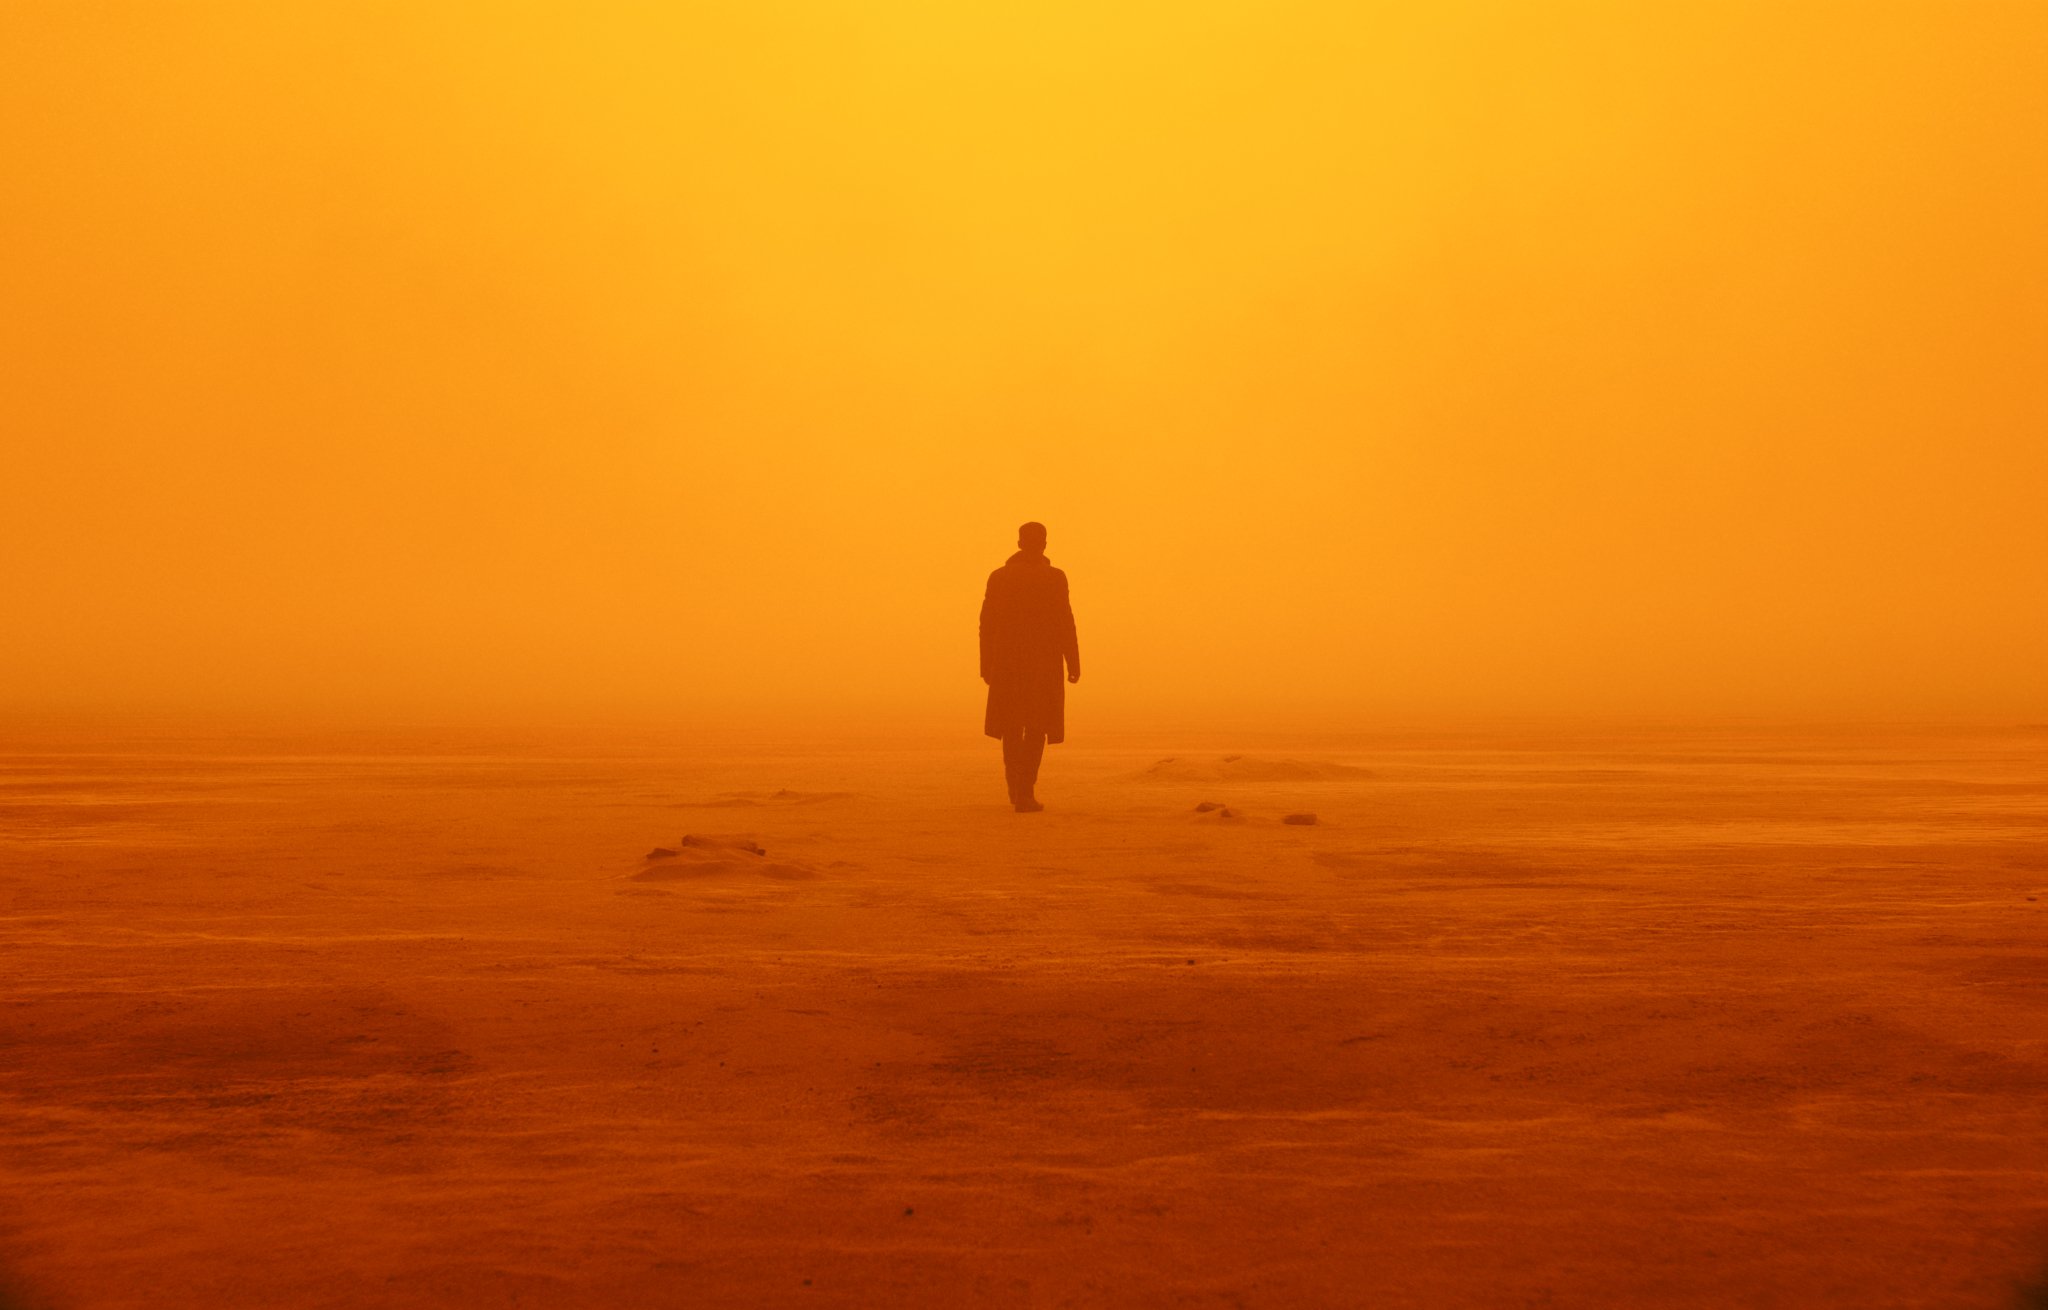 79 Blade Runner 2049 HD Wallpapers Background Images   Wallpaper